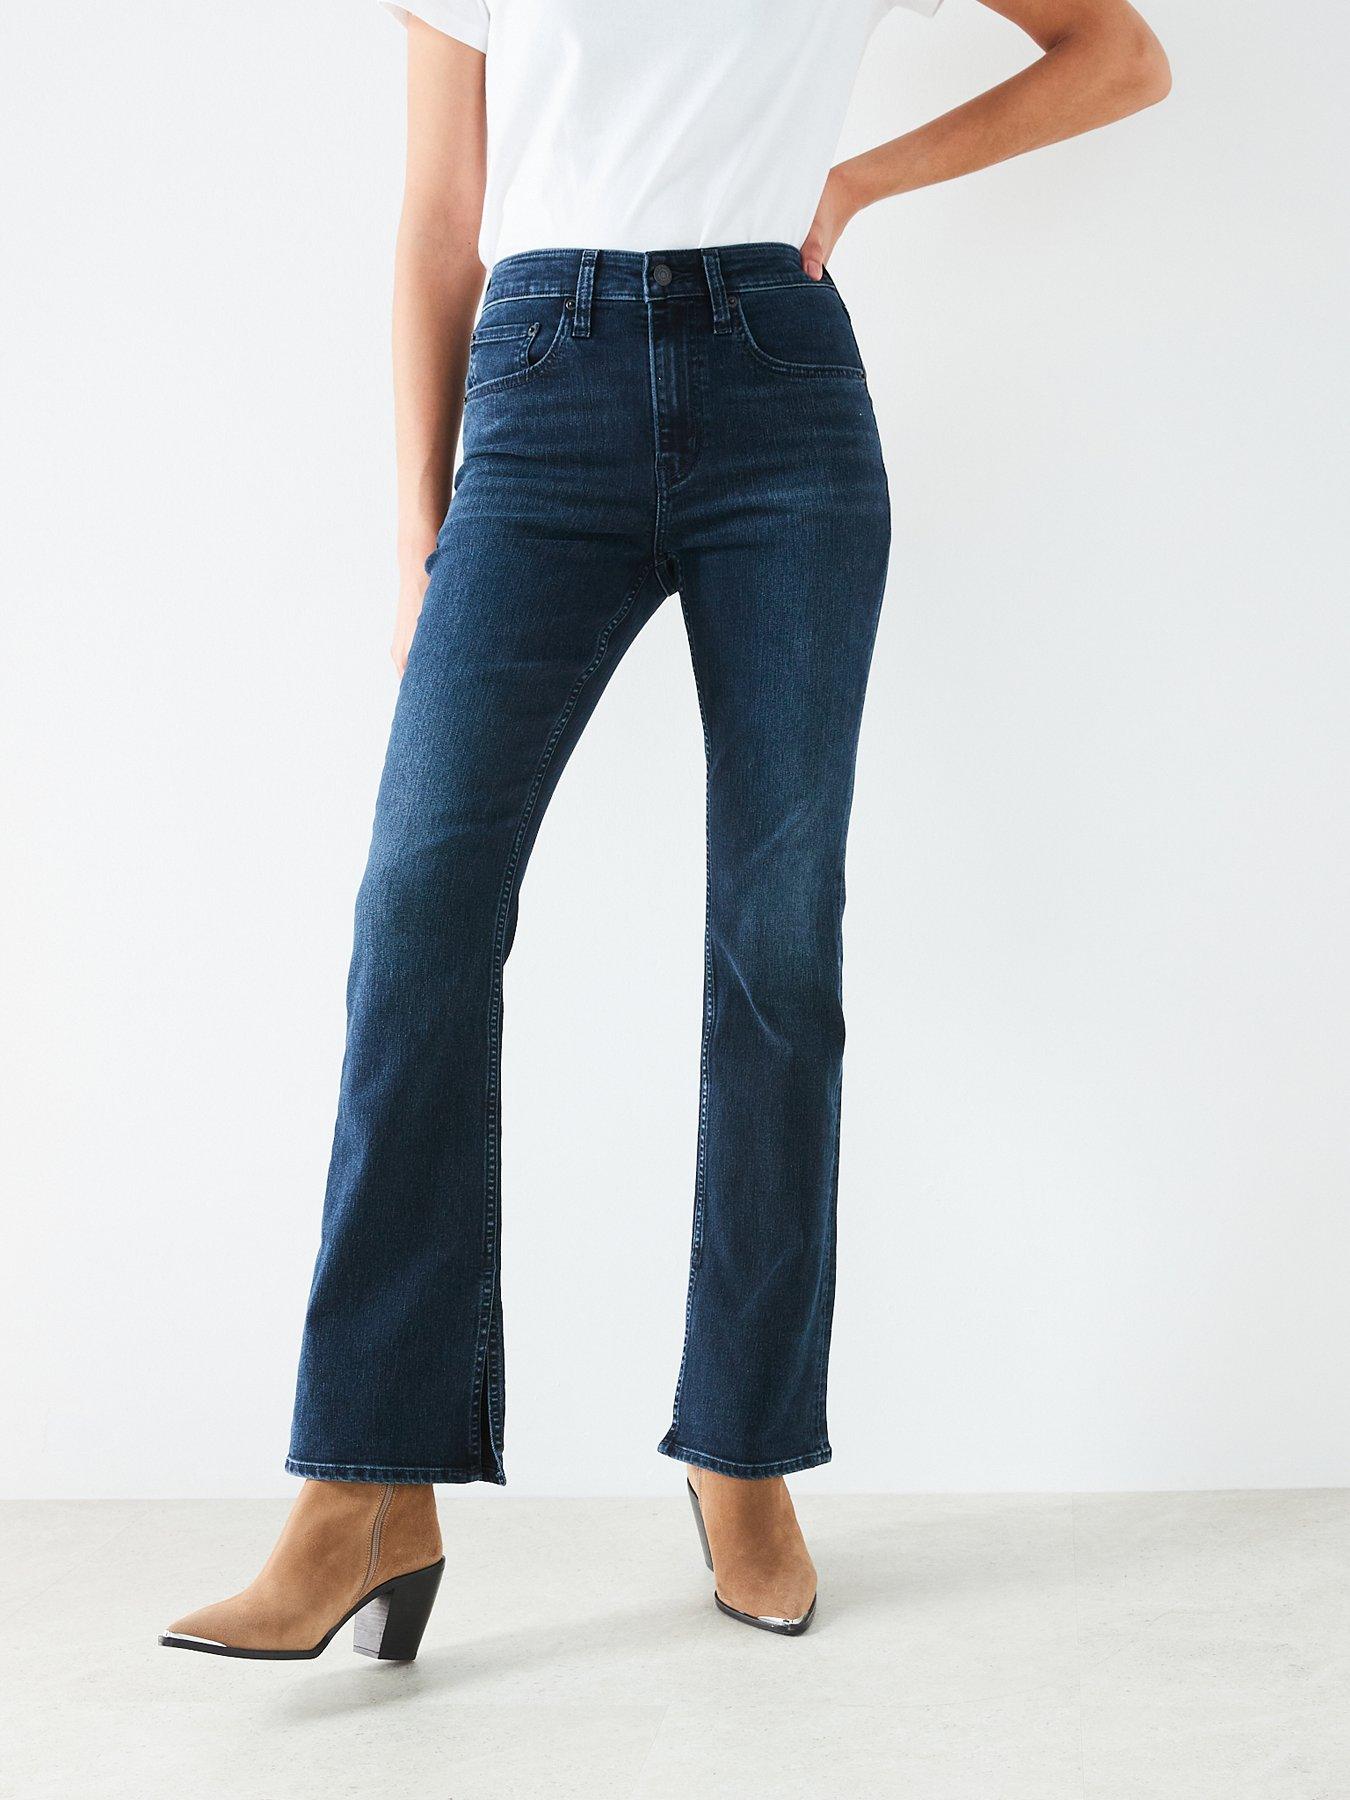 LEVI'S 725 High Rise Bootcut Jeans in Blue Wave Rinse